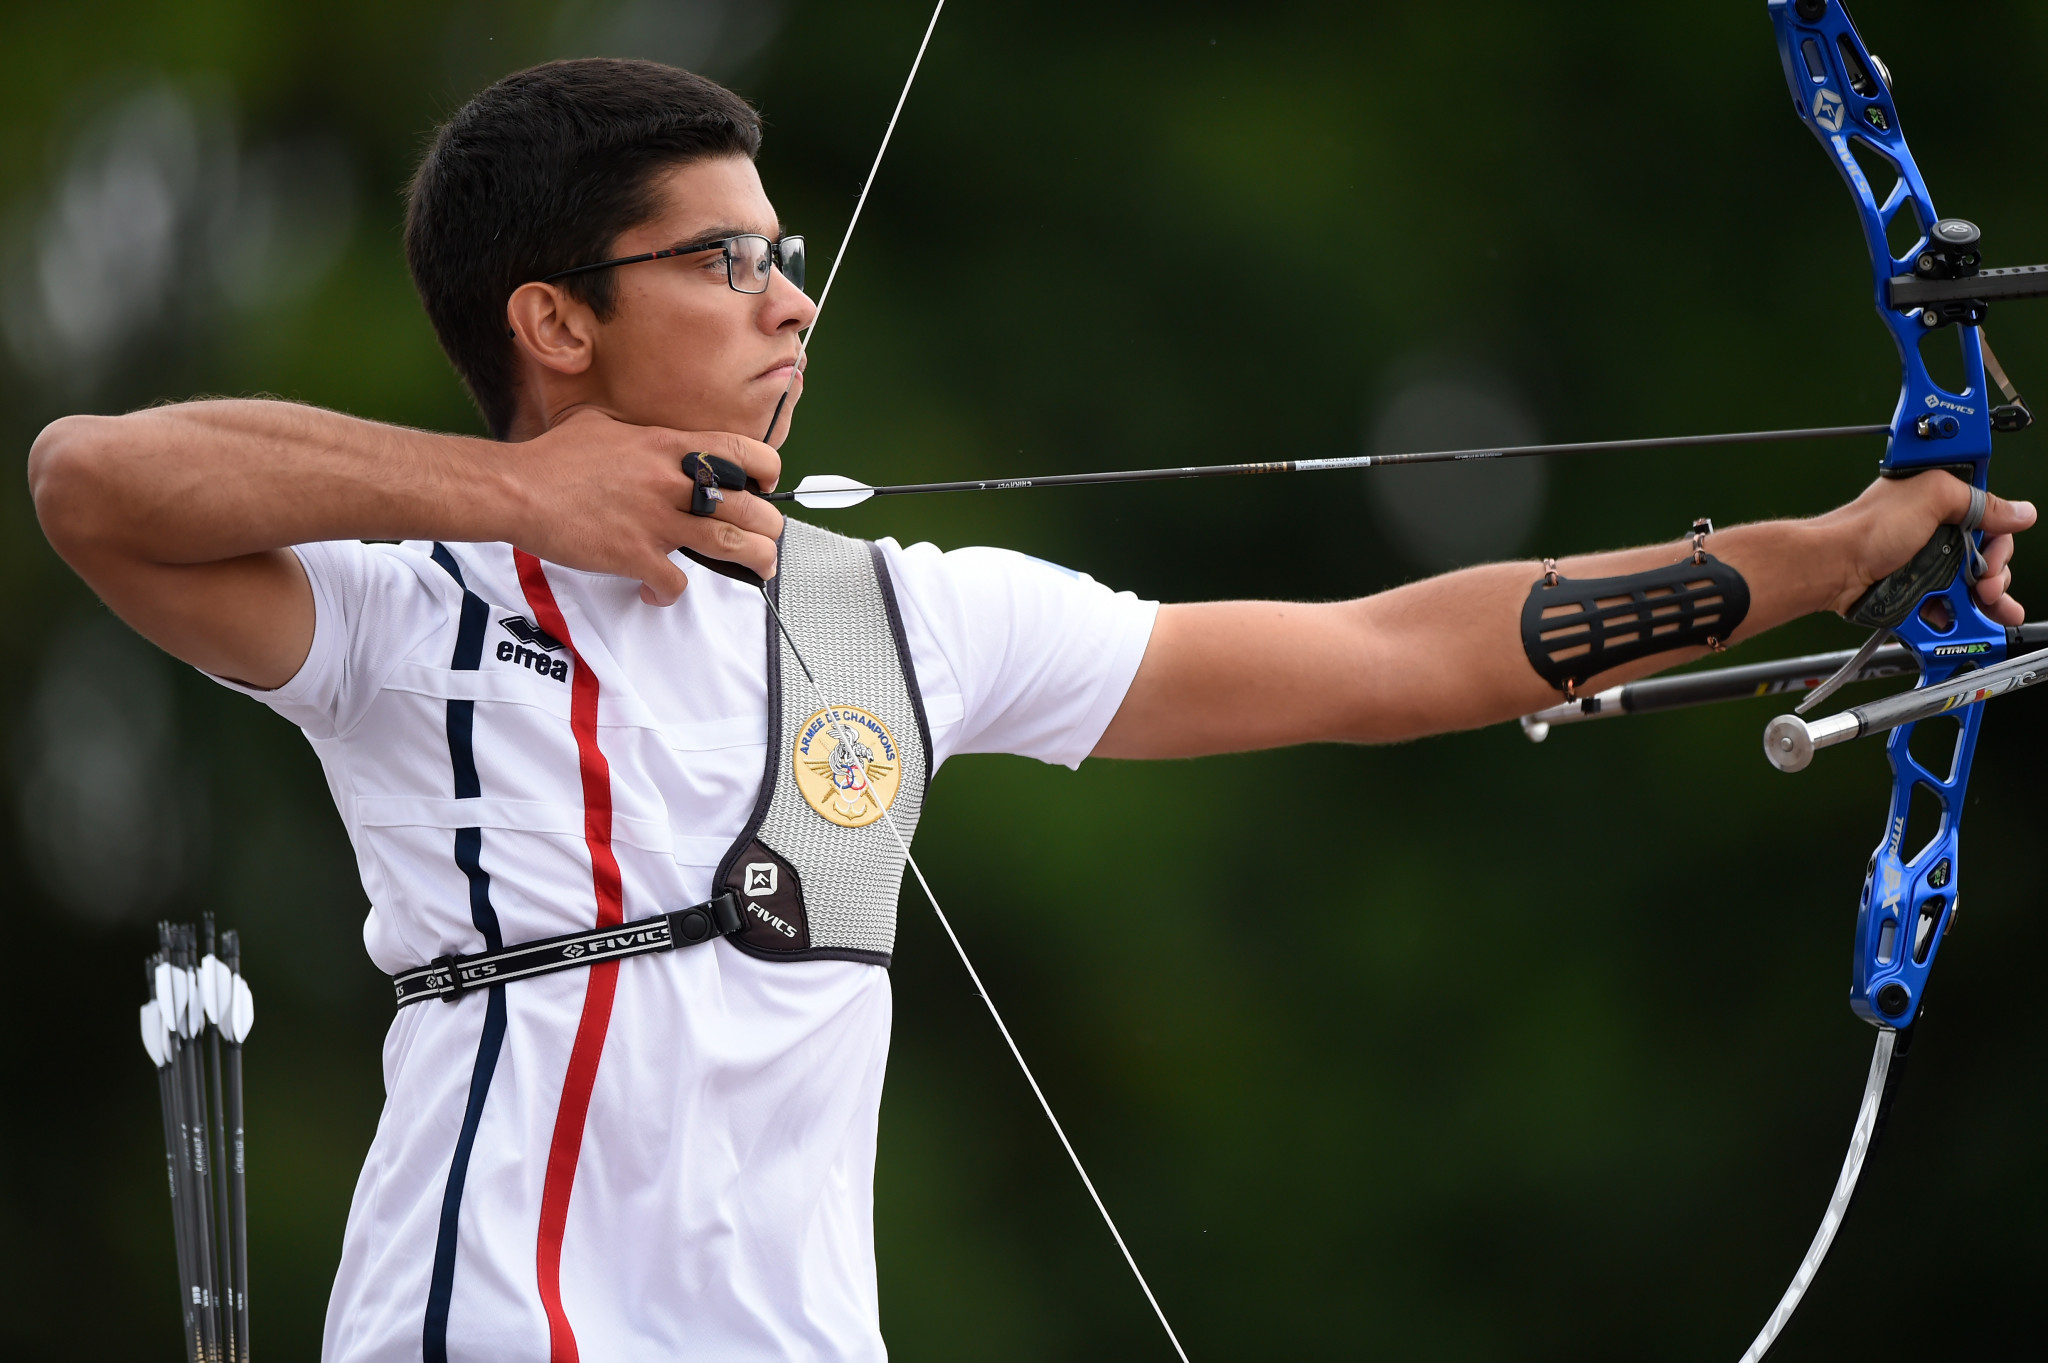 Hosts France among trio to book Tokyo 2020 places at final archery qualifier